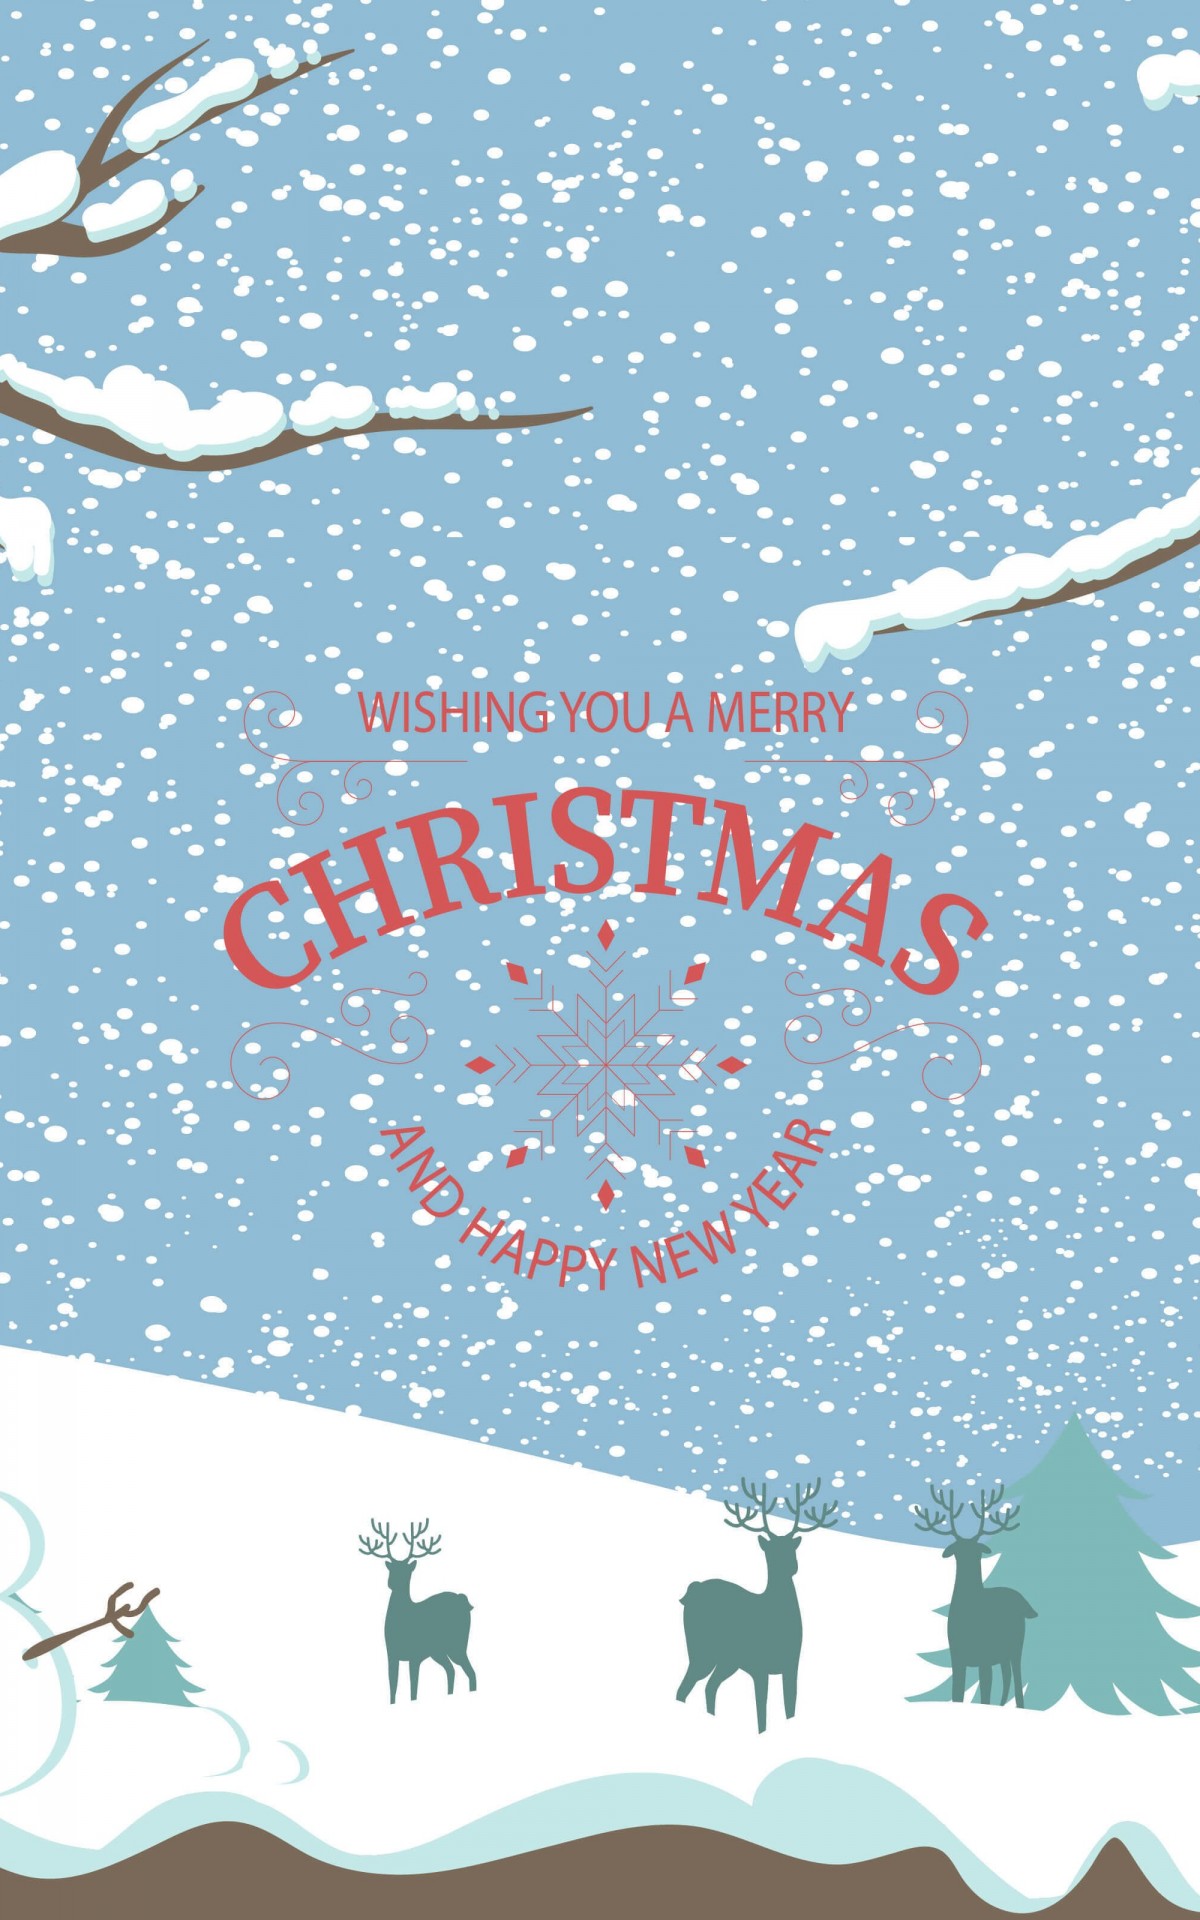 Merry Christmas Illustration Wallpaper for Amazon Kindle Fire HDX